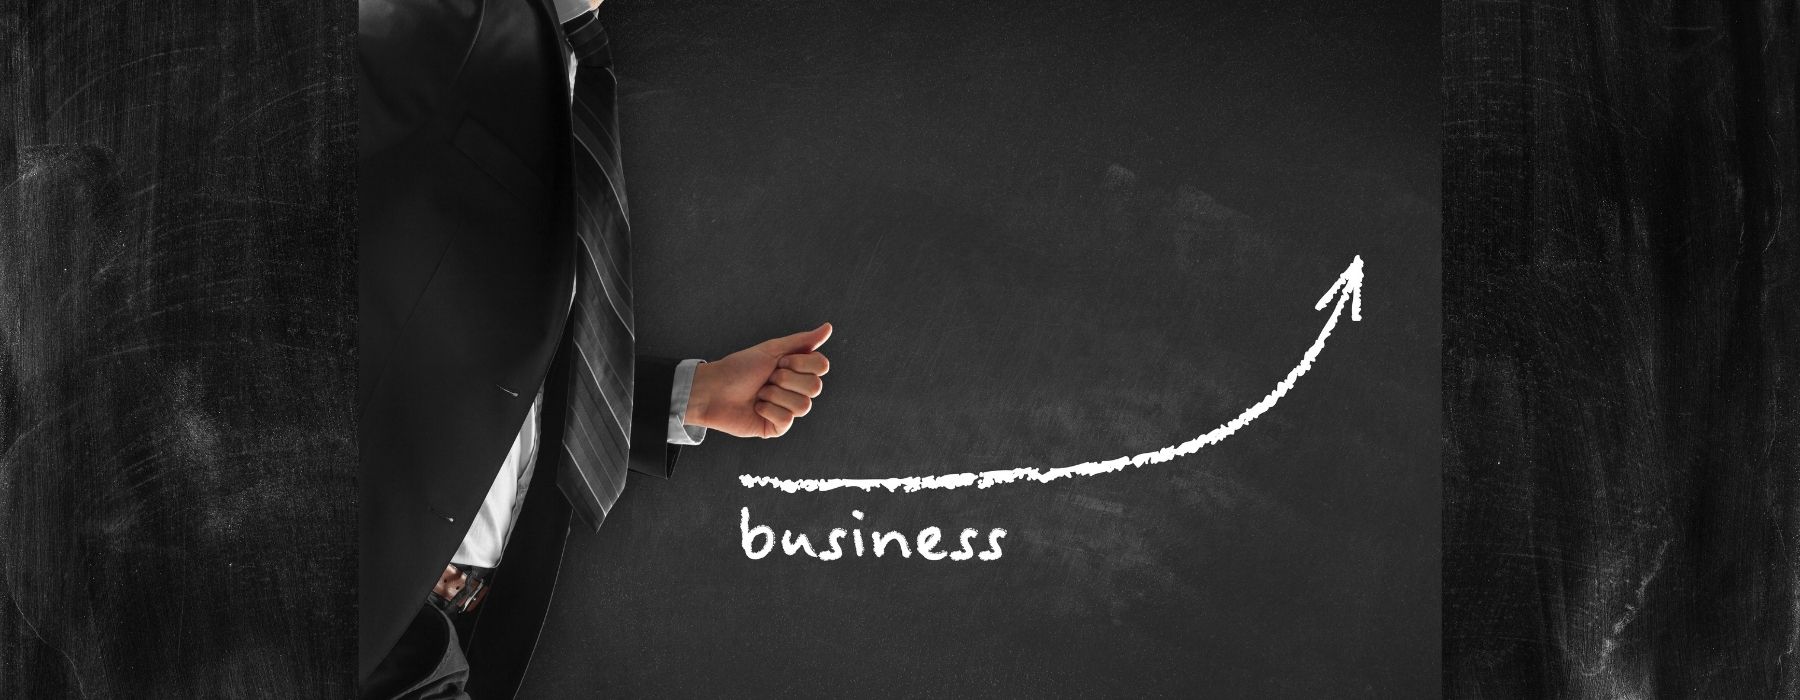 Growth Opportunities for Business Owners in 2021 - CPA Tax Attorneys